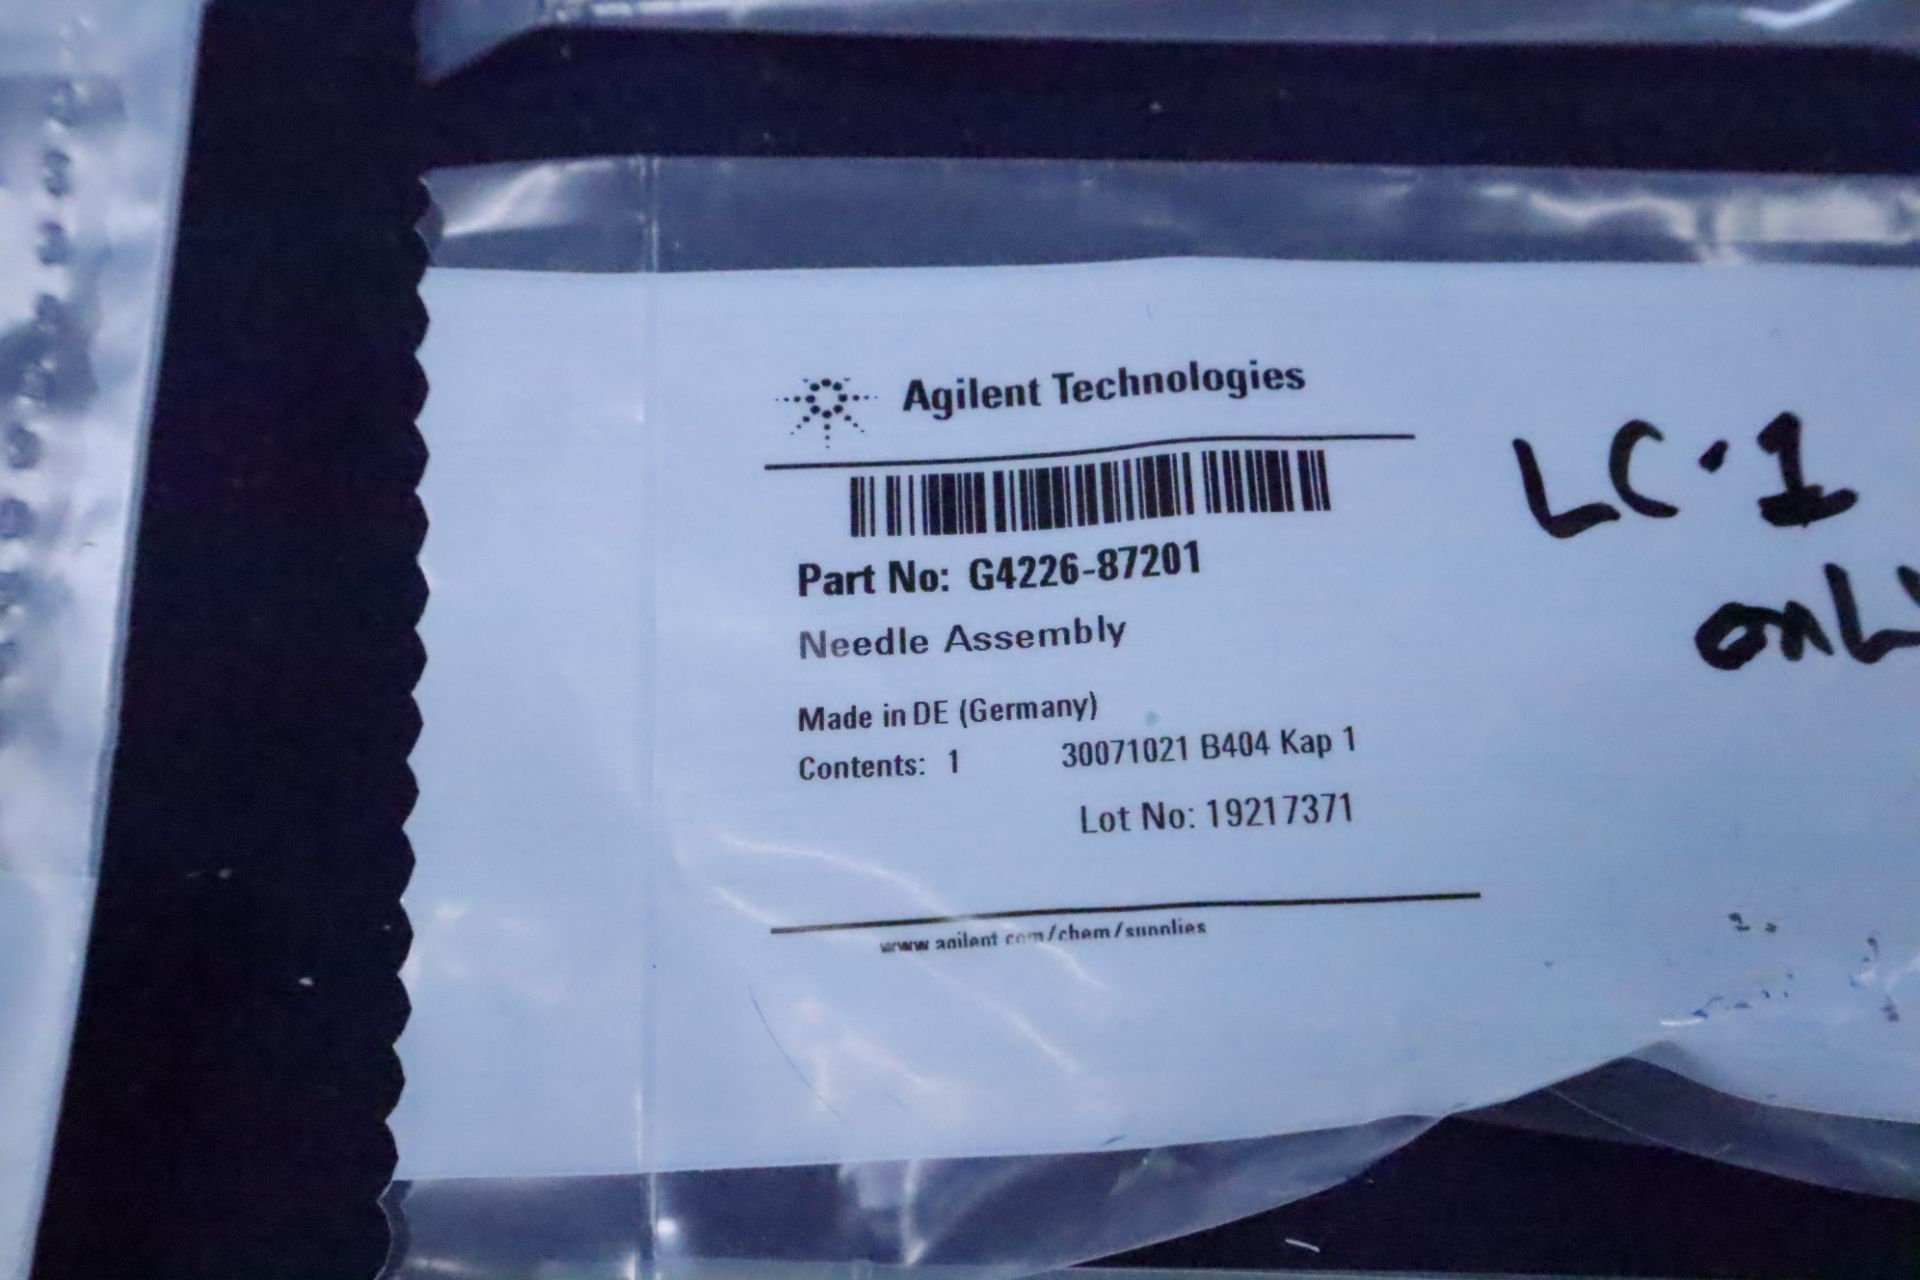 (NIB) Agilent Technologies OEM Replacement Parts for LC/MS Machines - Image 10 of 28